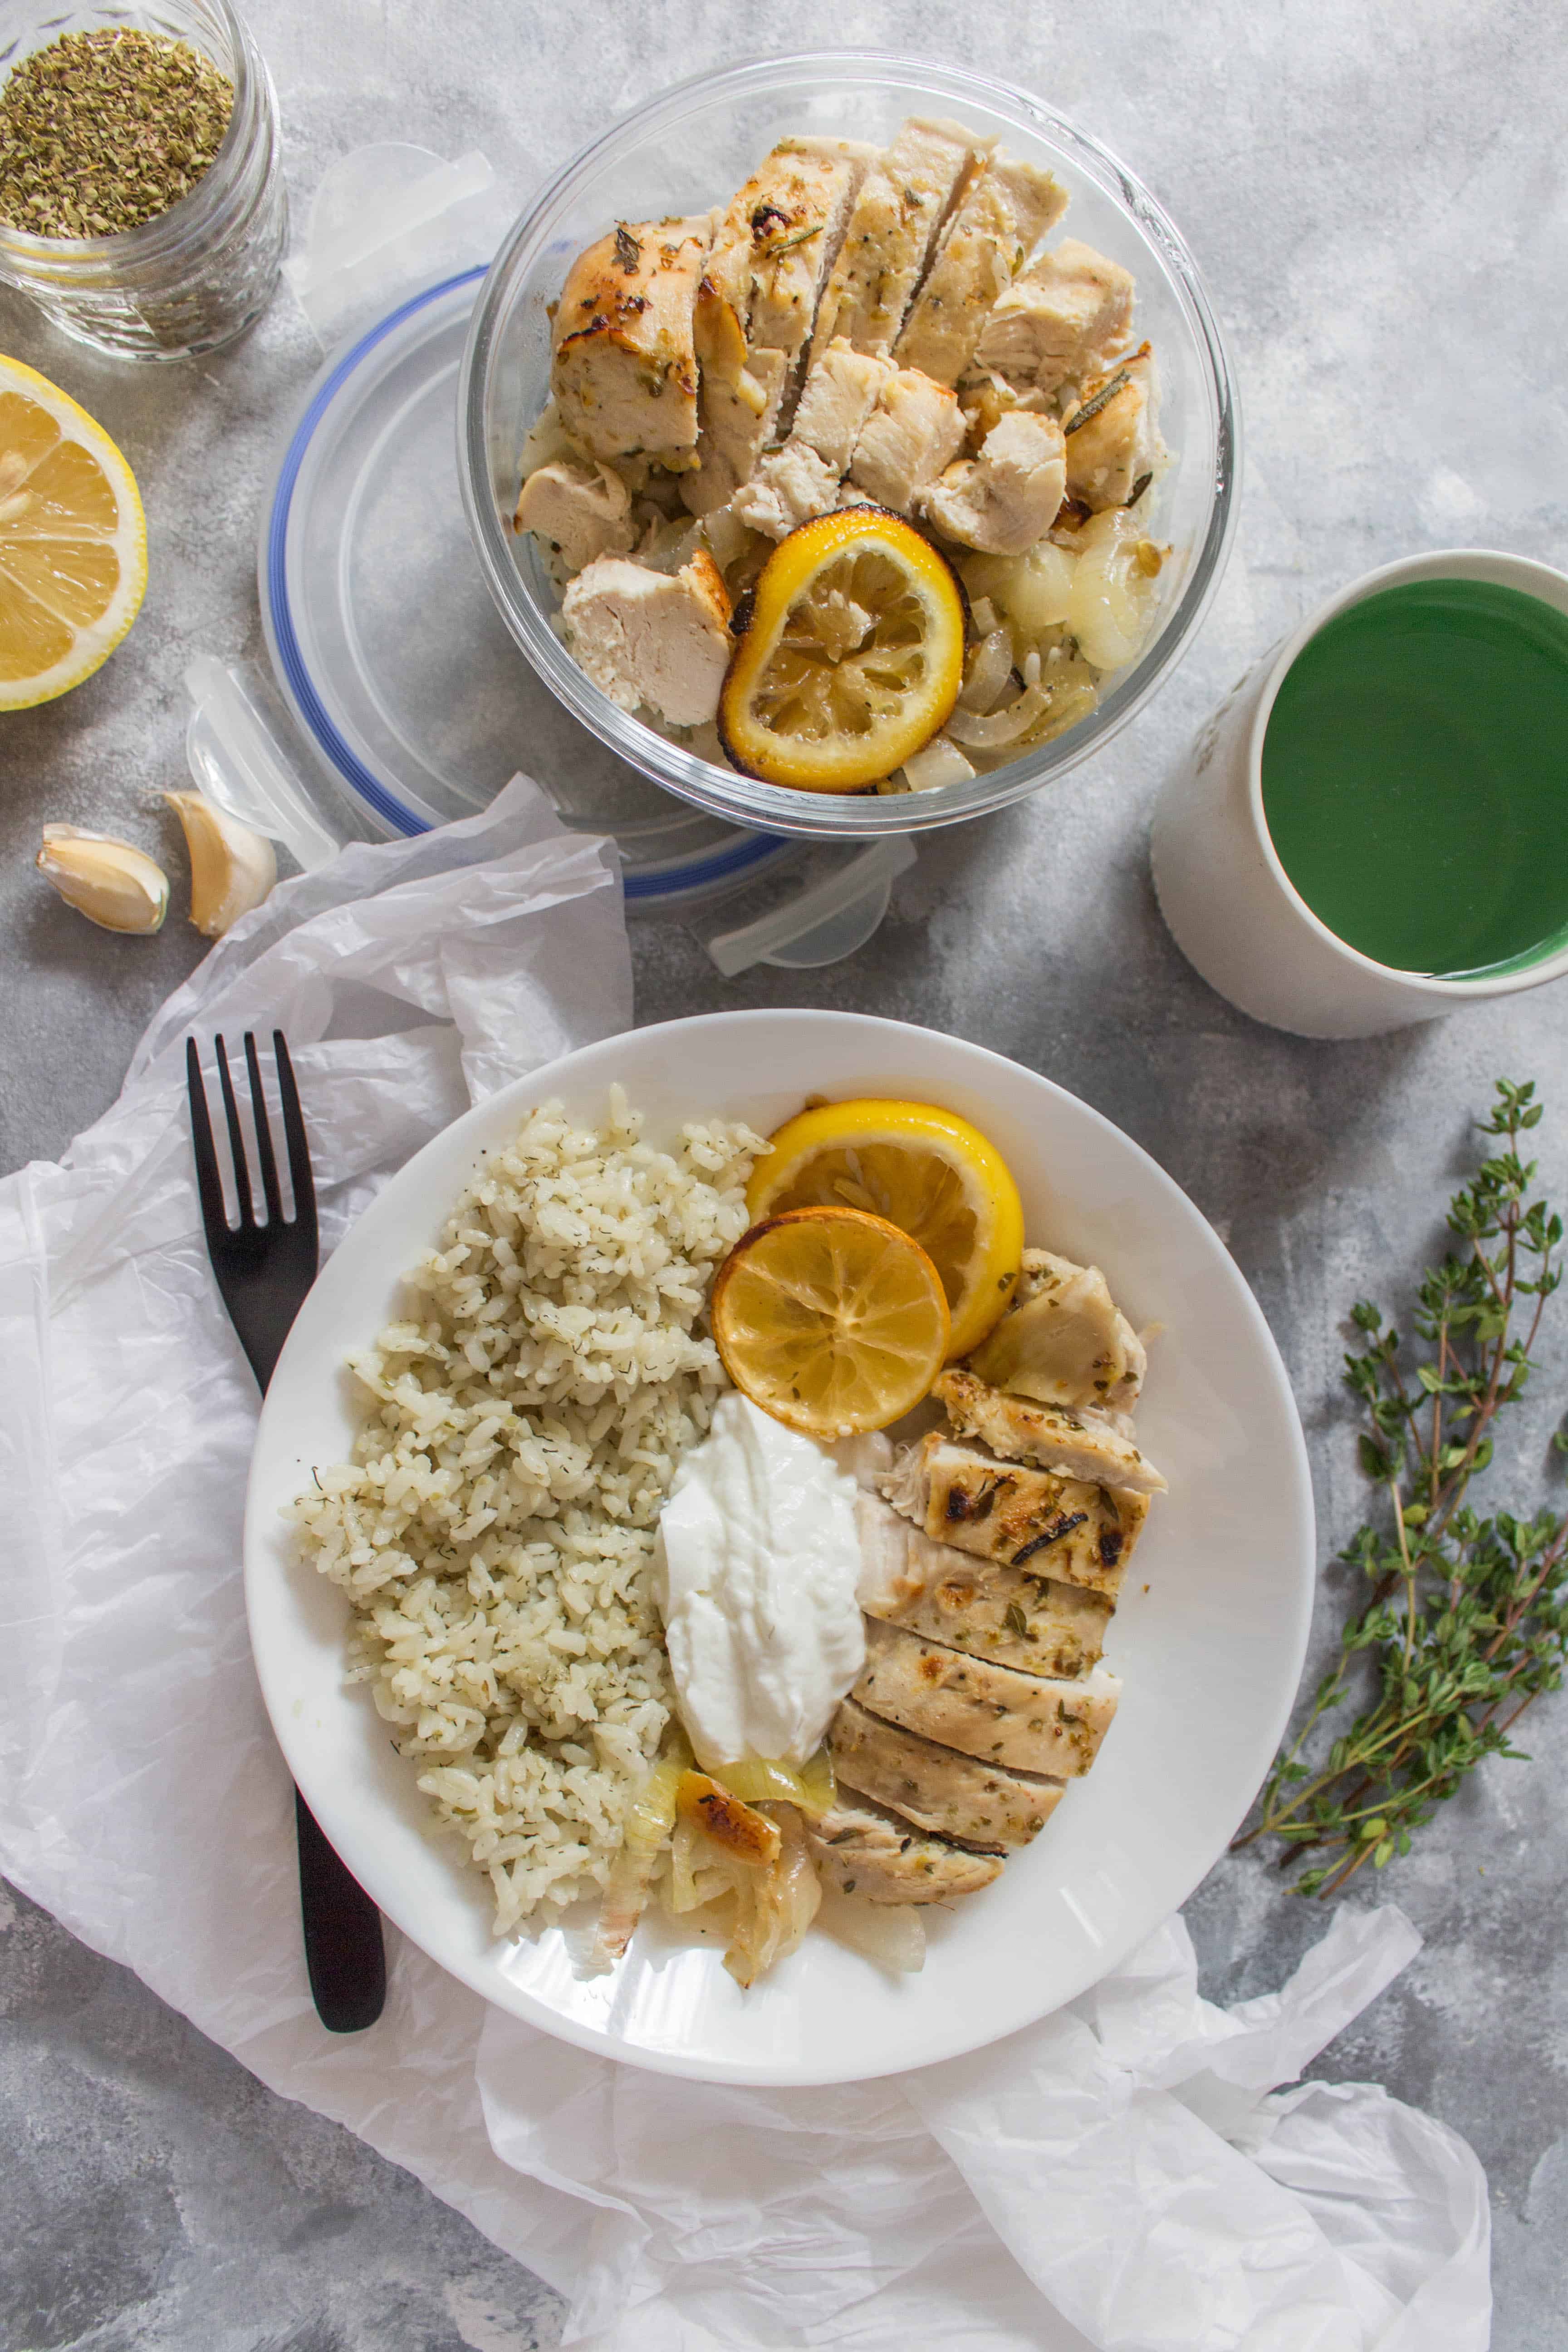 This Greek Chicken Meal Prep is so easy to make and is packed full of flavour thanks to the marinade. Plus, thanks to the yogurt in the marinade, the meat is extremely tender.